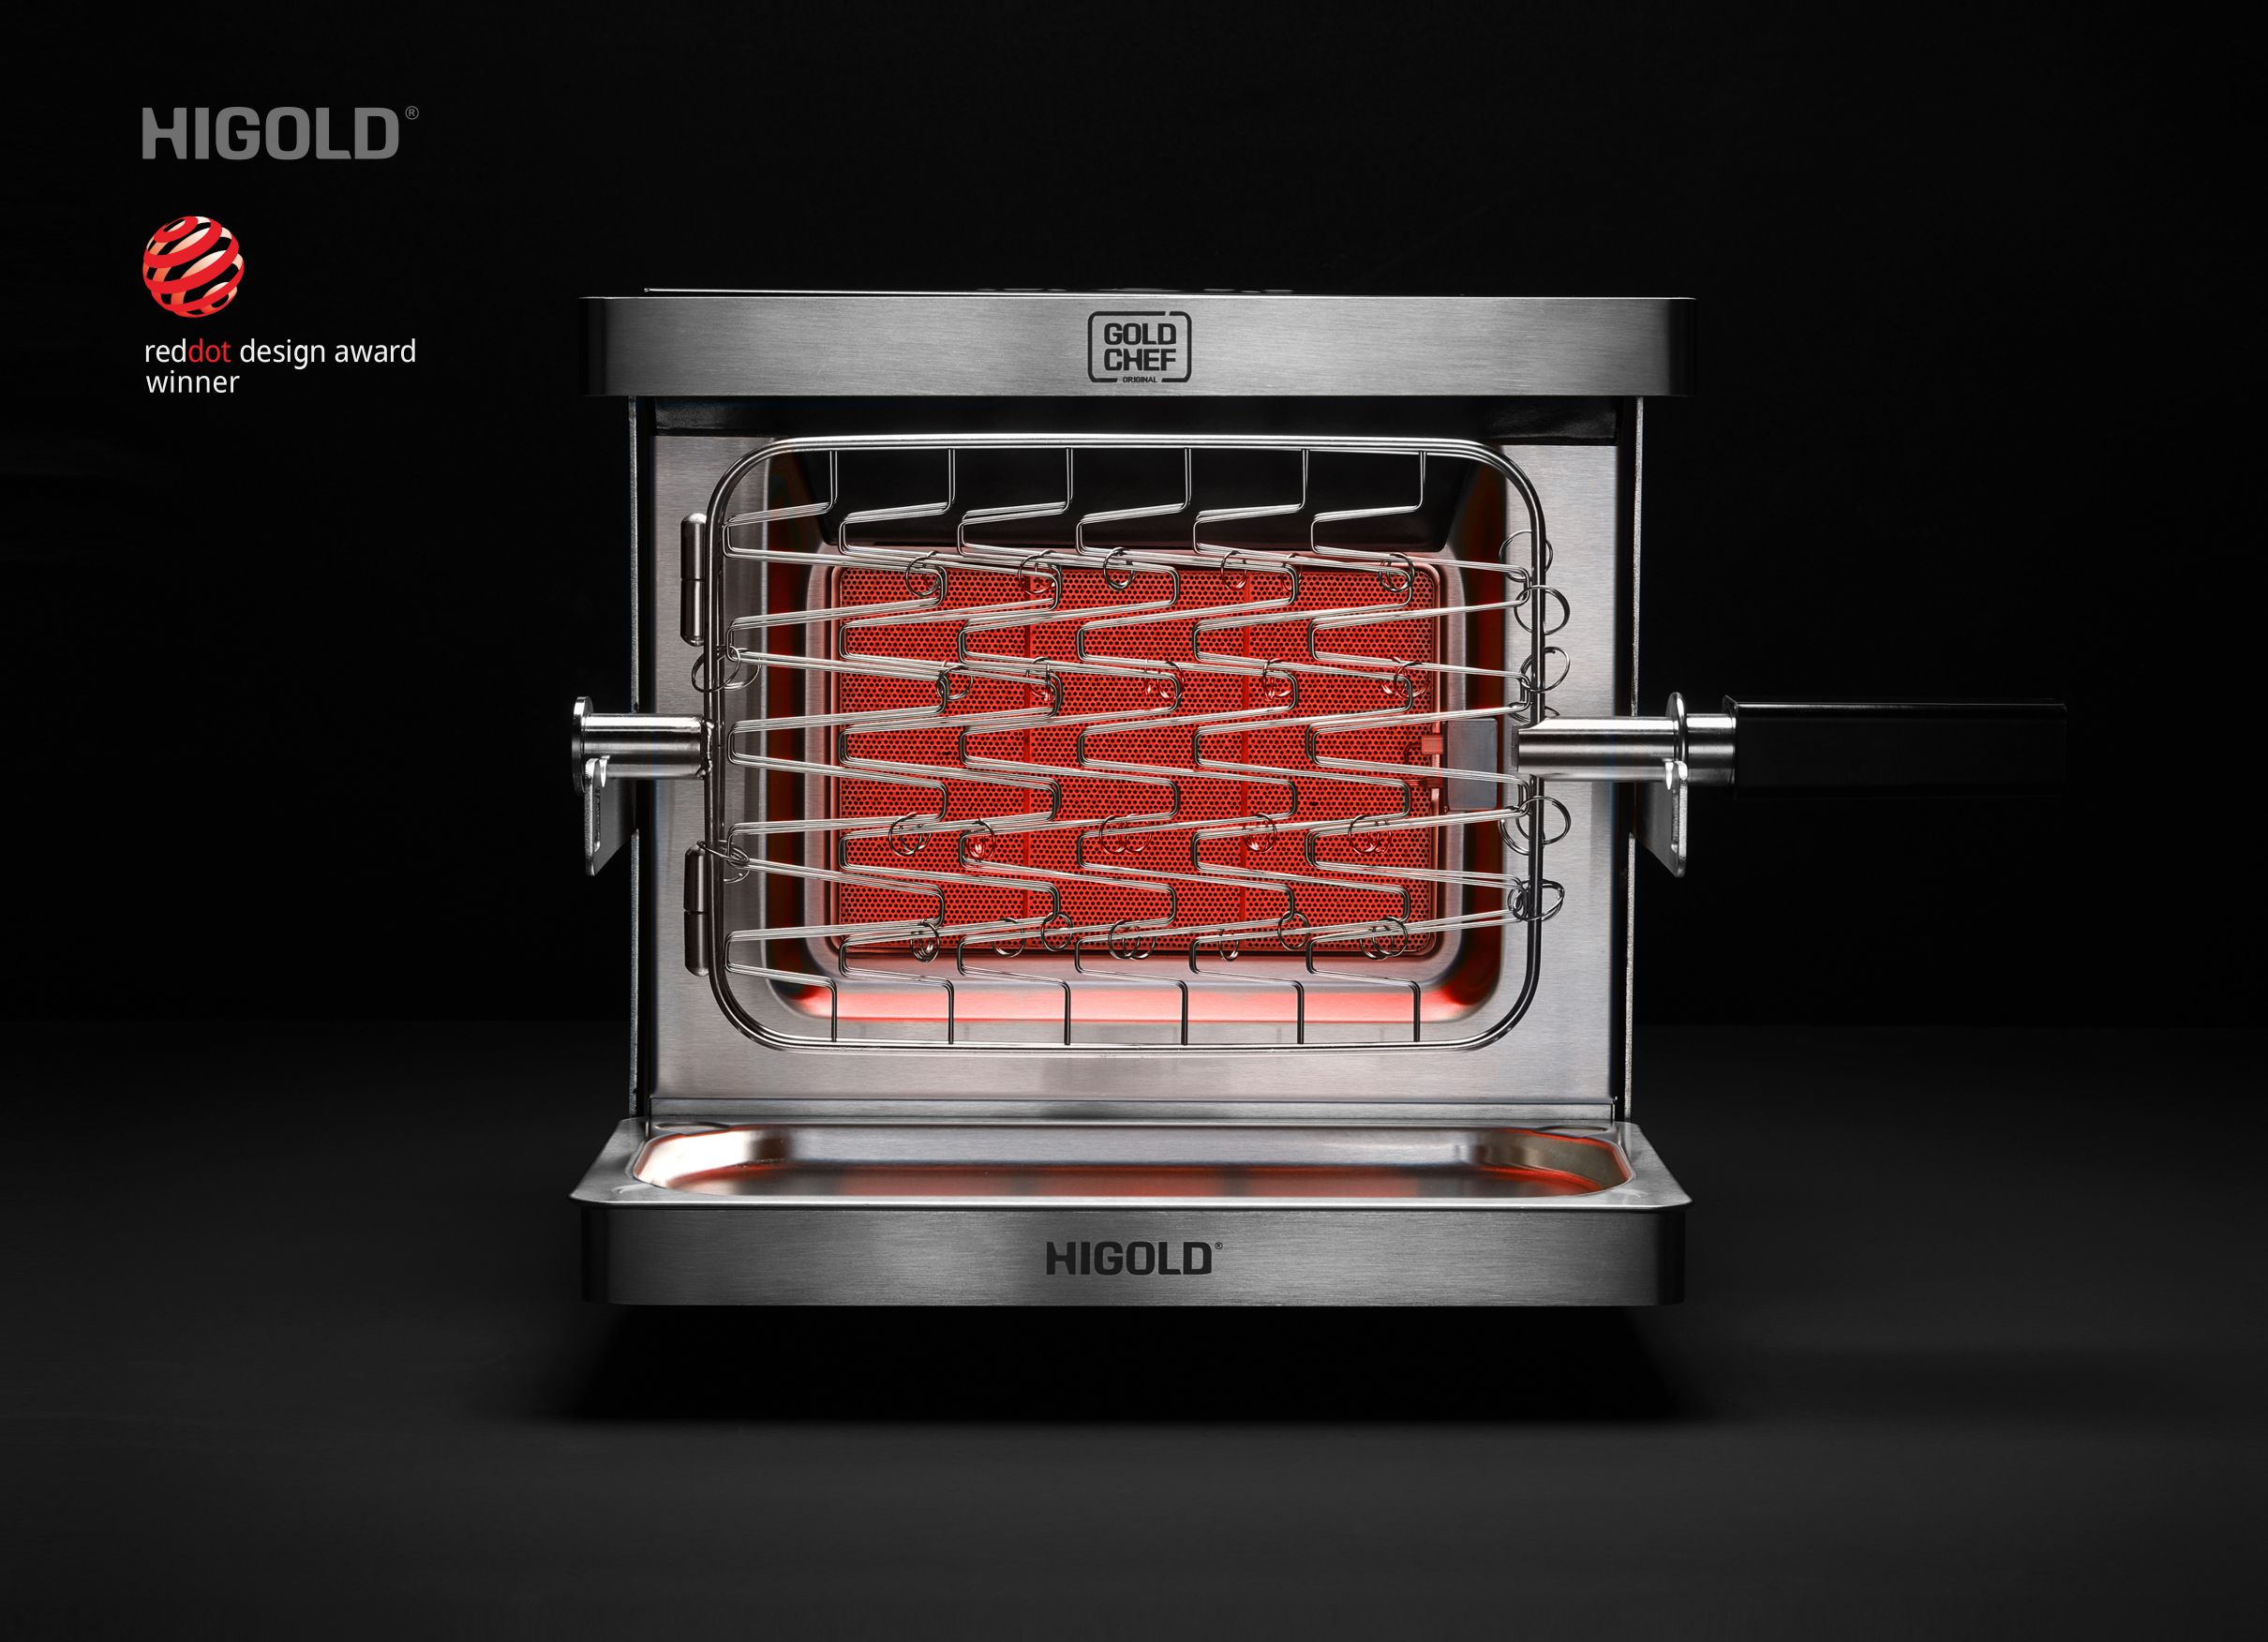 higold goldchef bbq portable grill thumbnail image